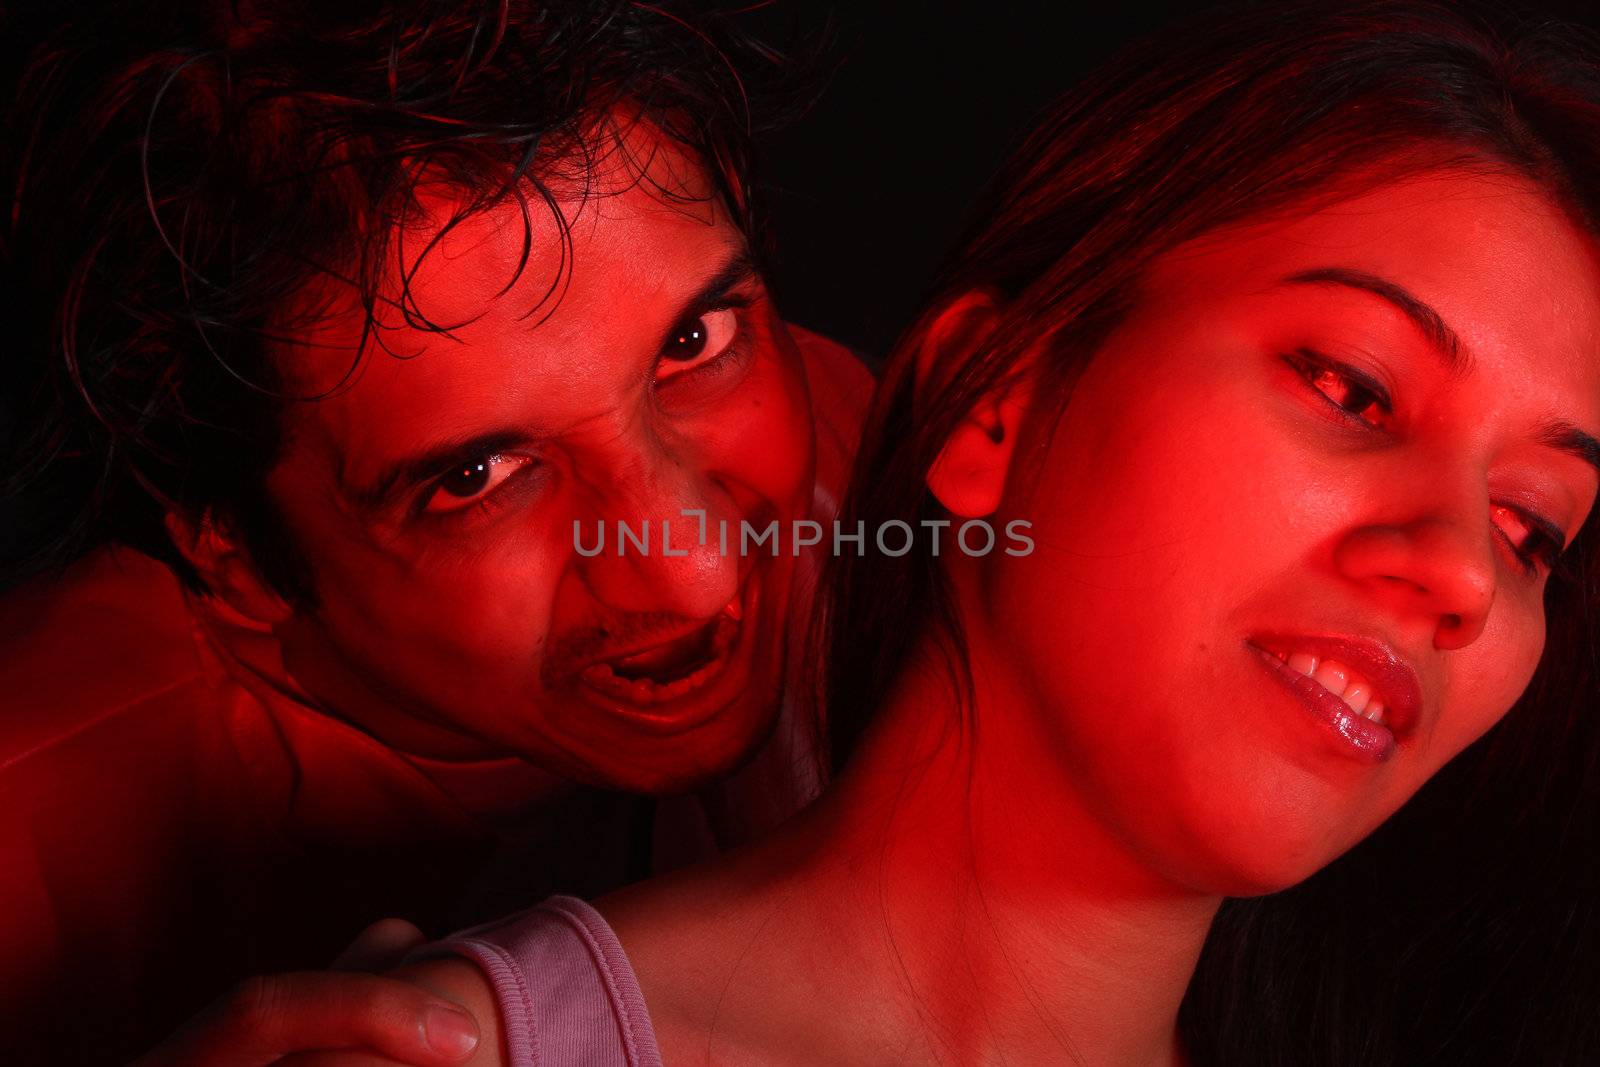 An Indian vampire about to bite a beautiful woman for blood.